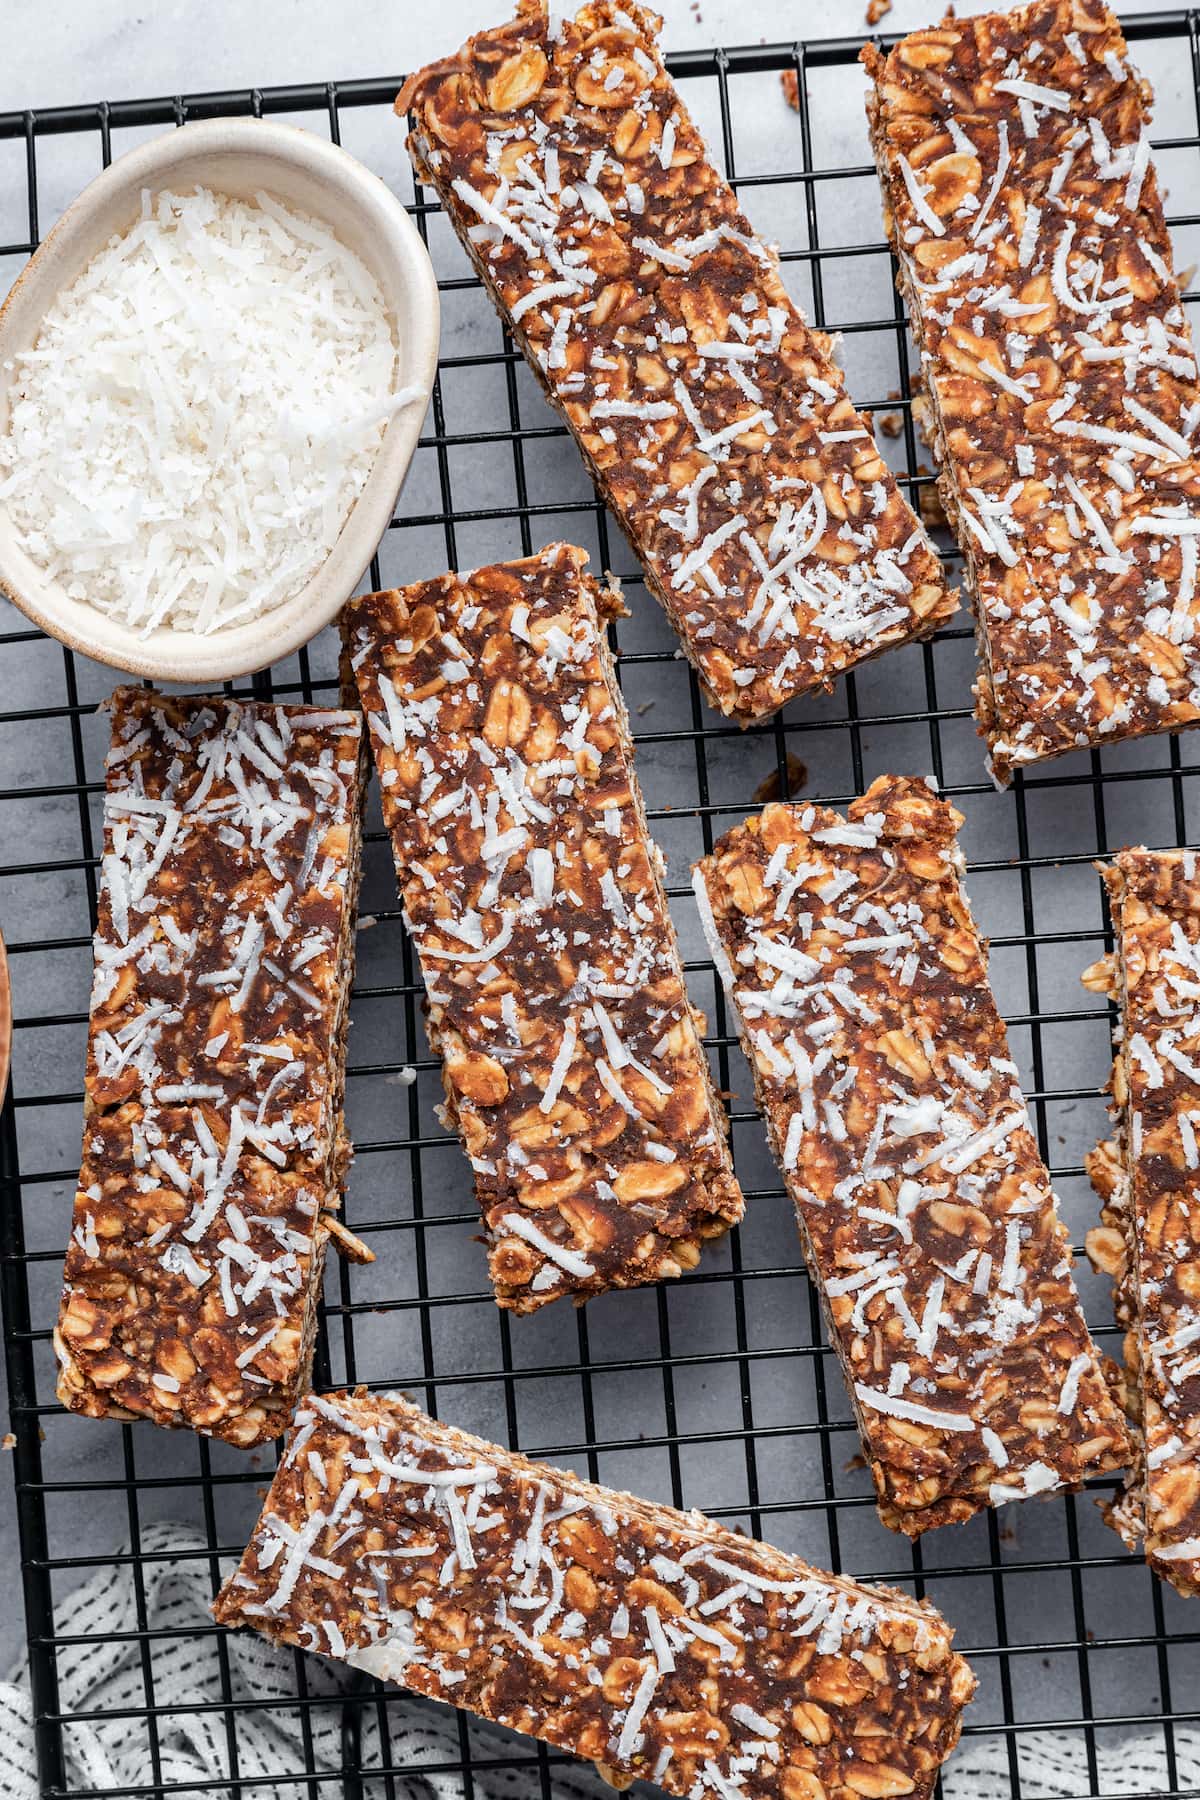 No-bake chocolate coconut bars on a wire rack.